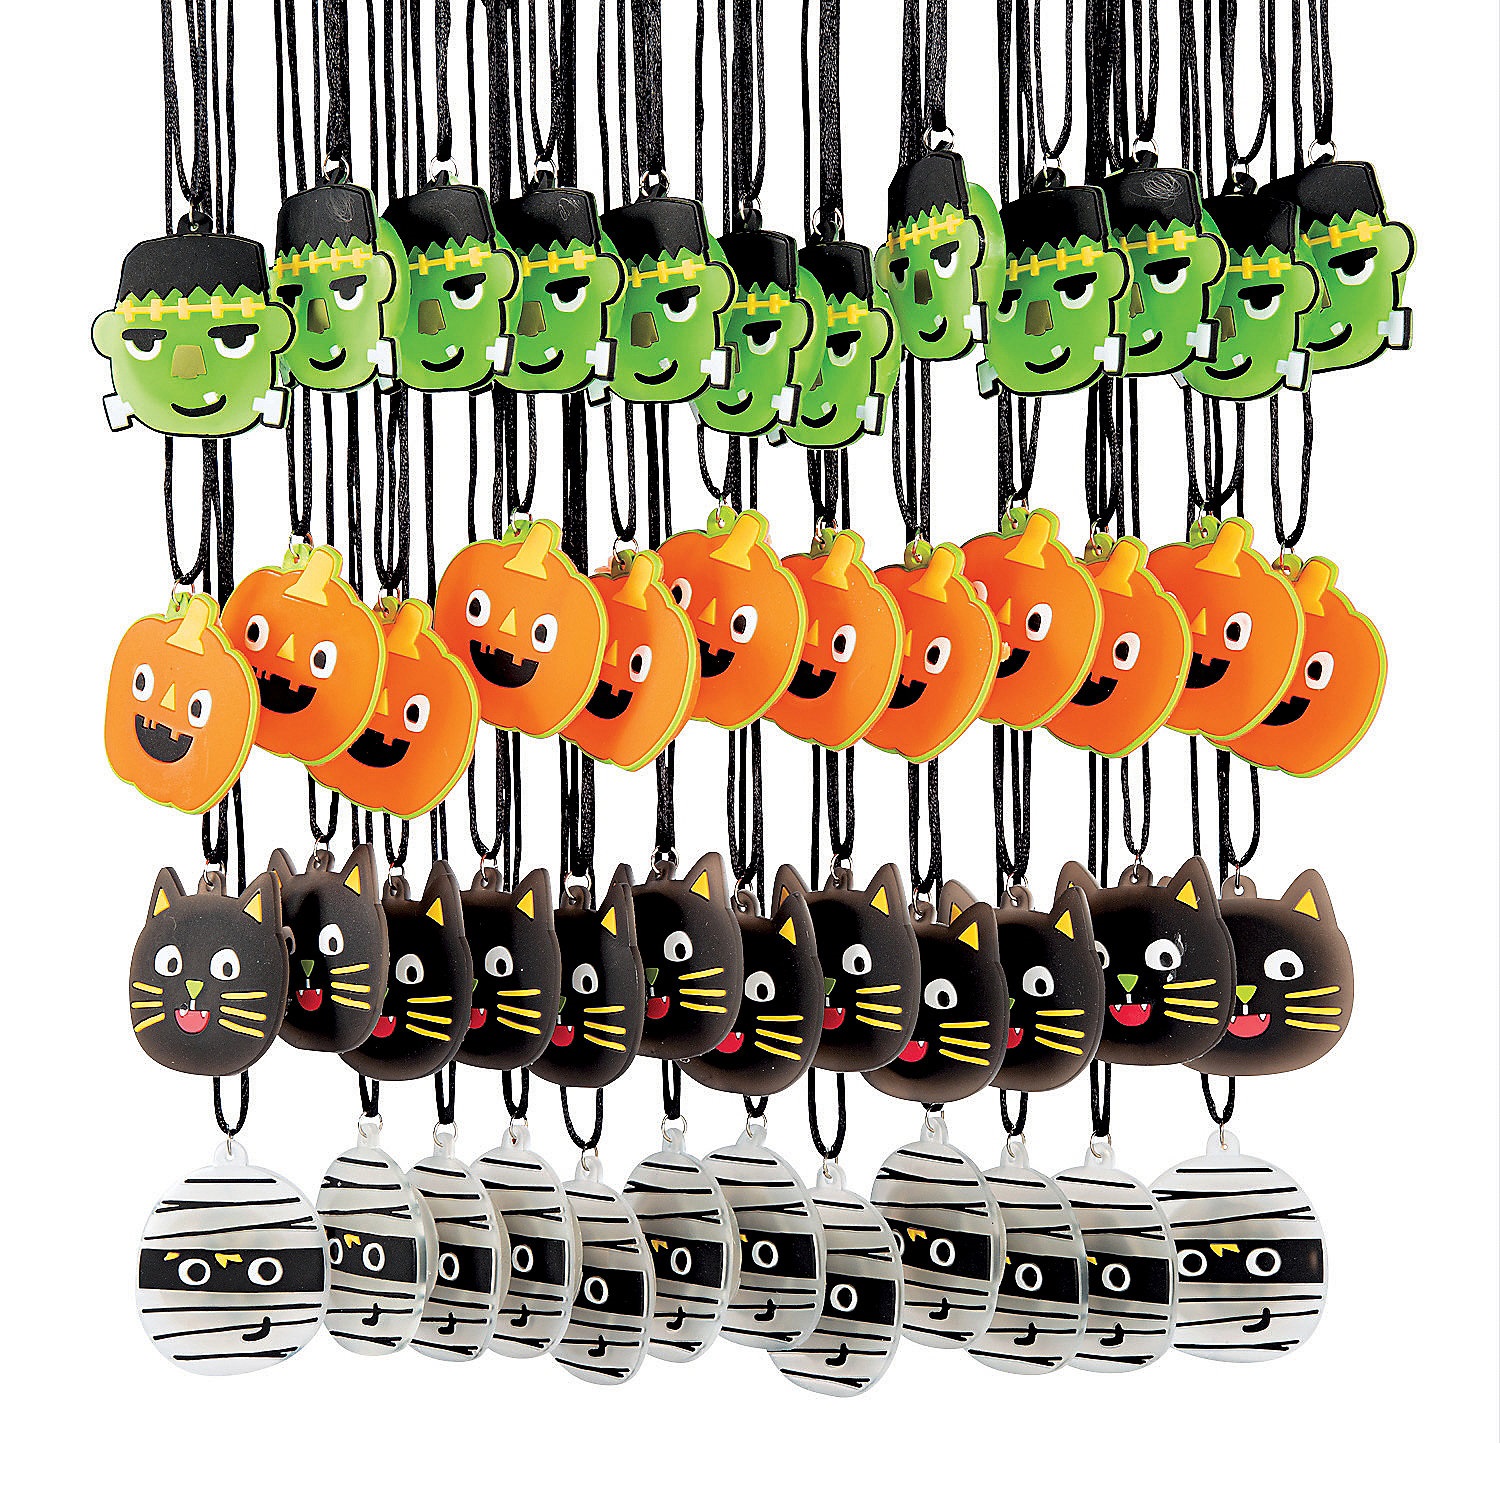 ghoul-gang-light-up-necklaces-48-pc-_13960435